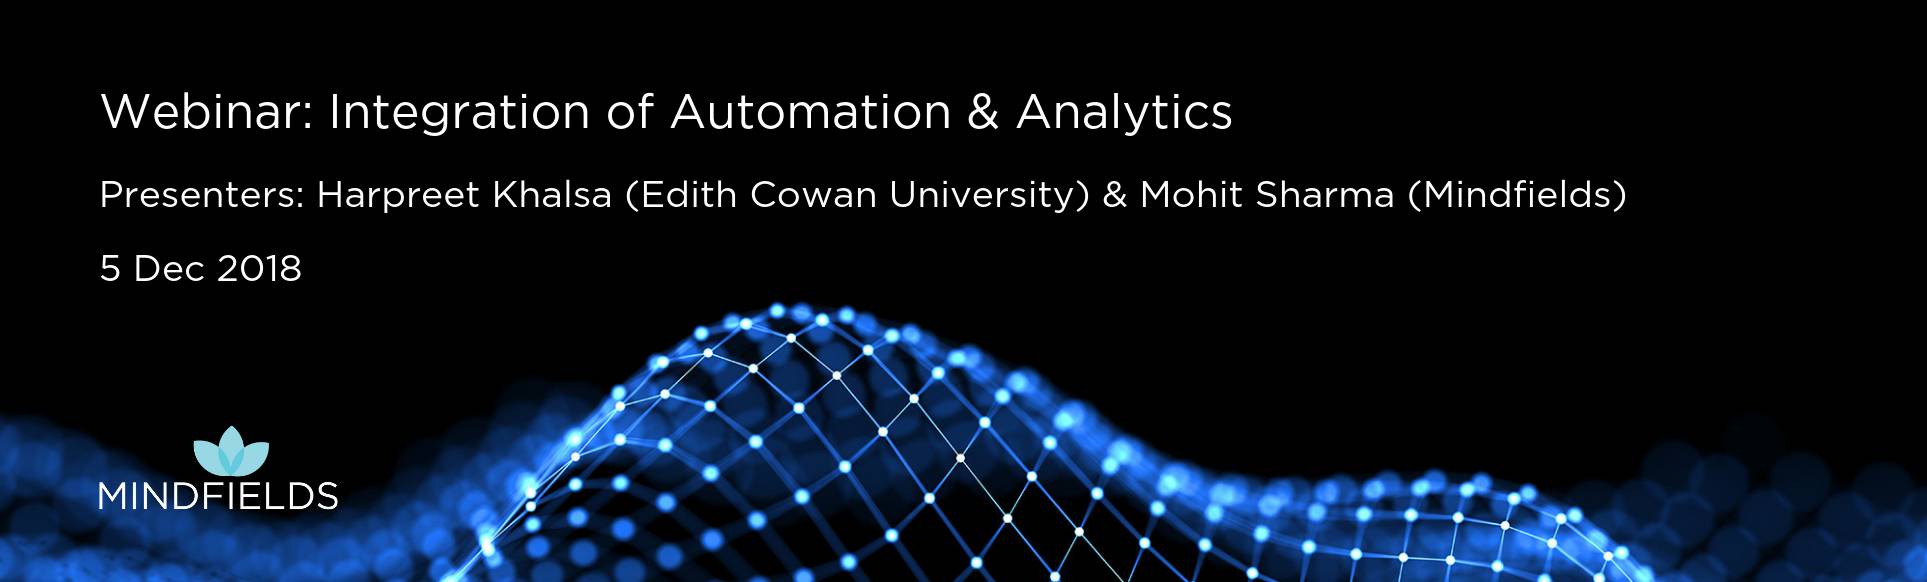 Integration of Automation and Analytics Webinar